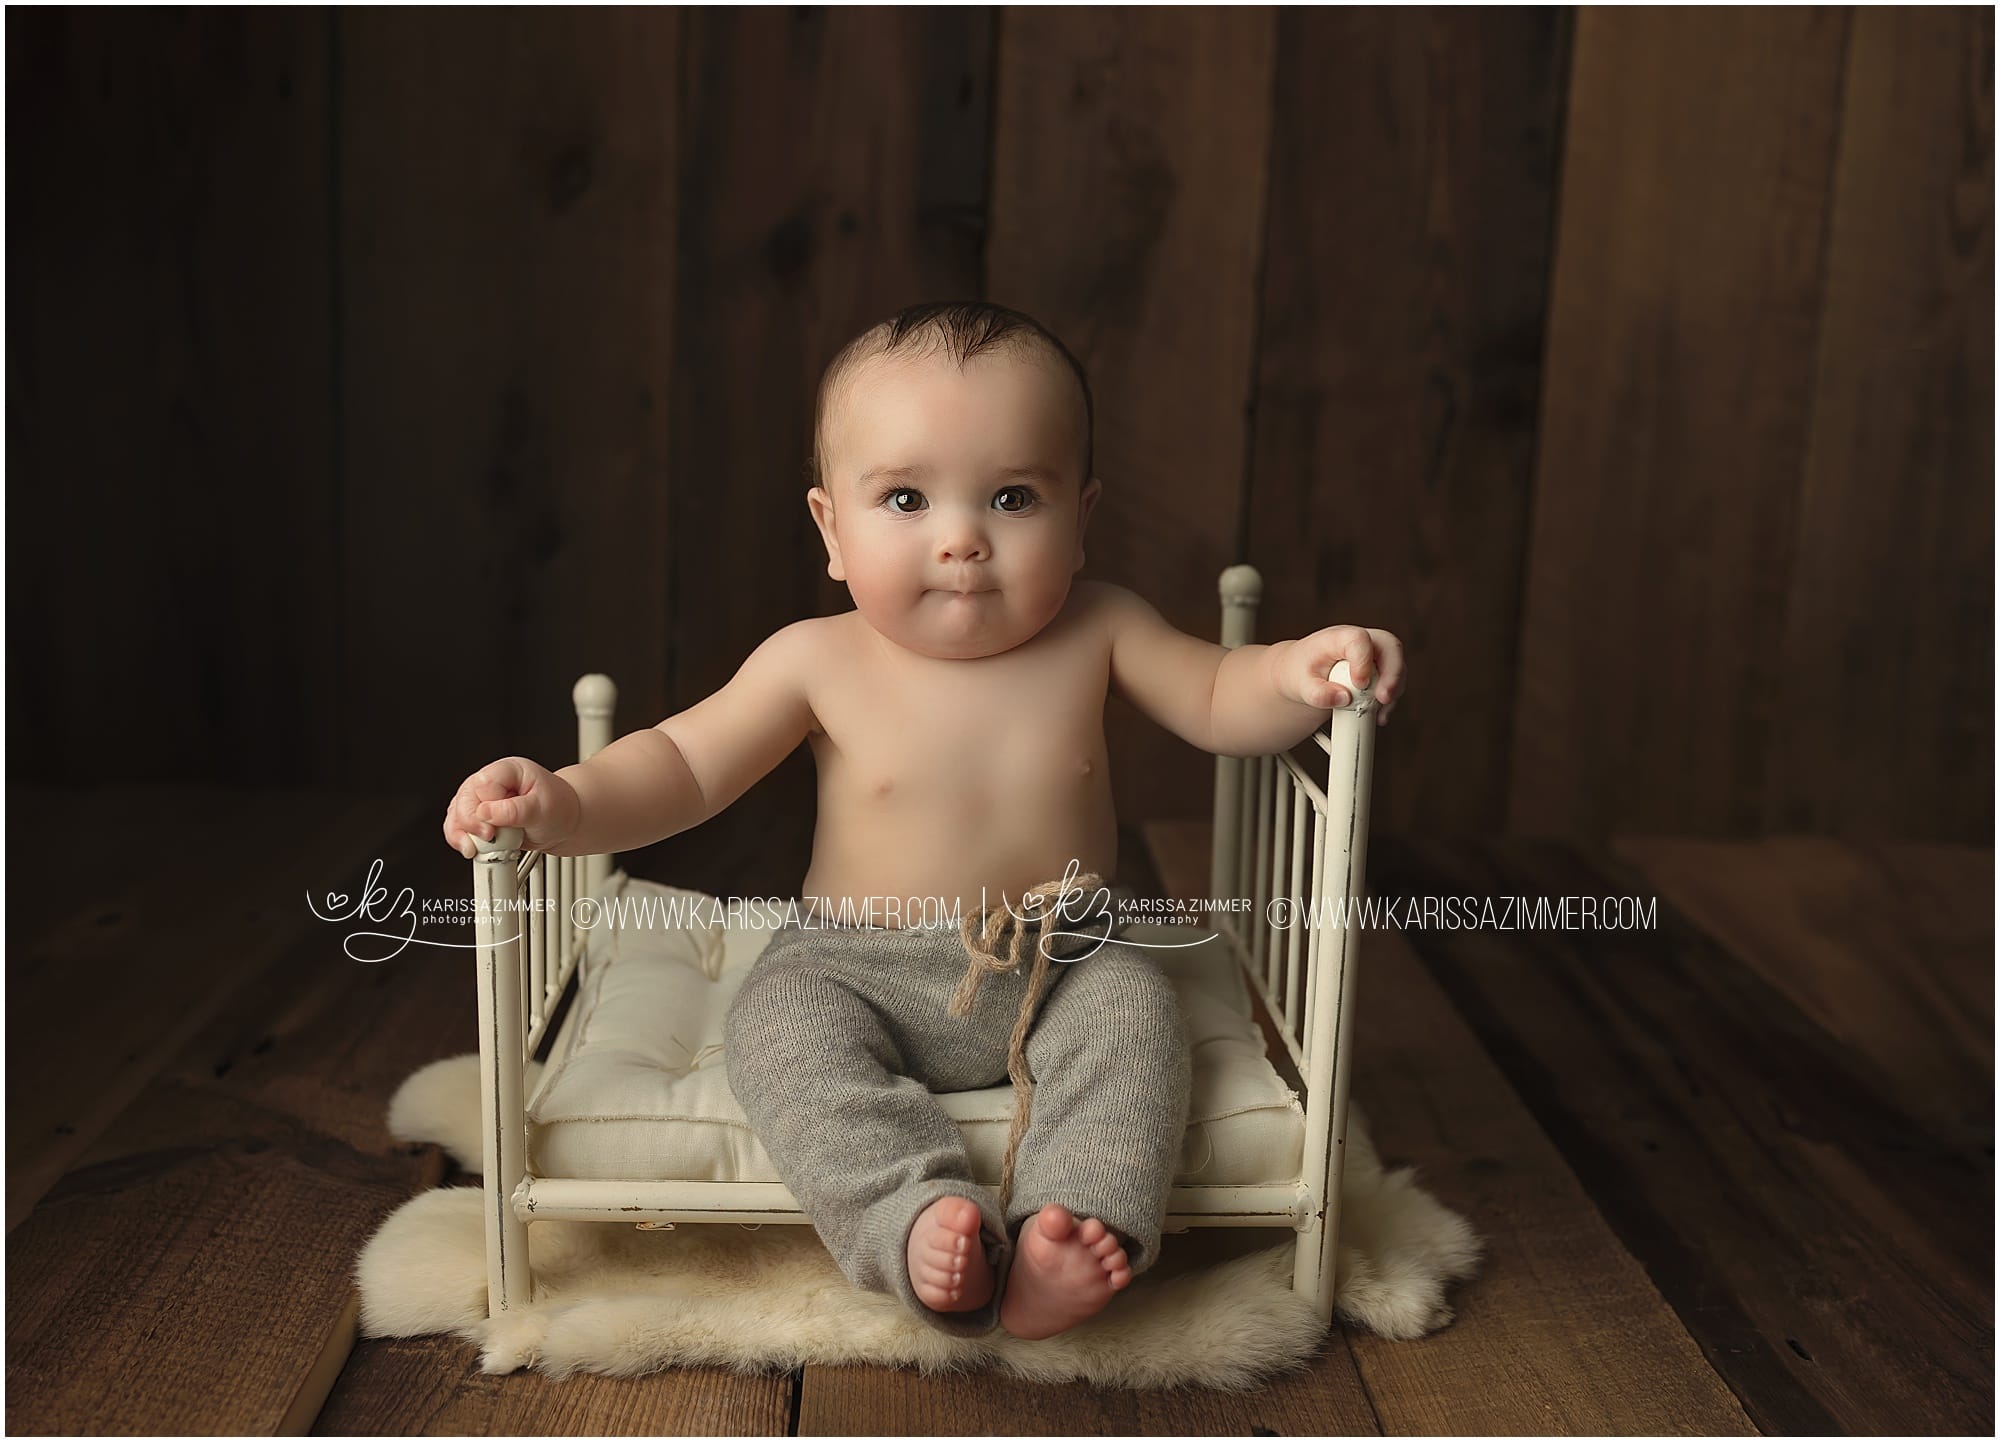 6 month old baby boy photographed by baby photographer karissa zimmer